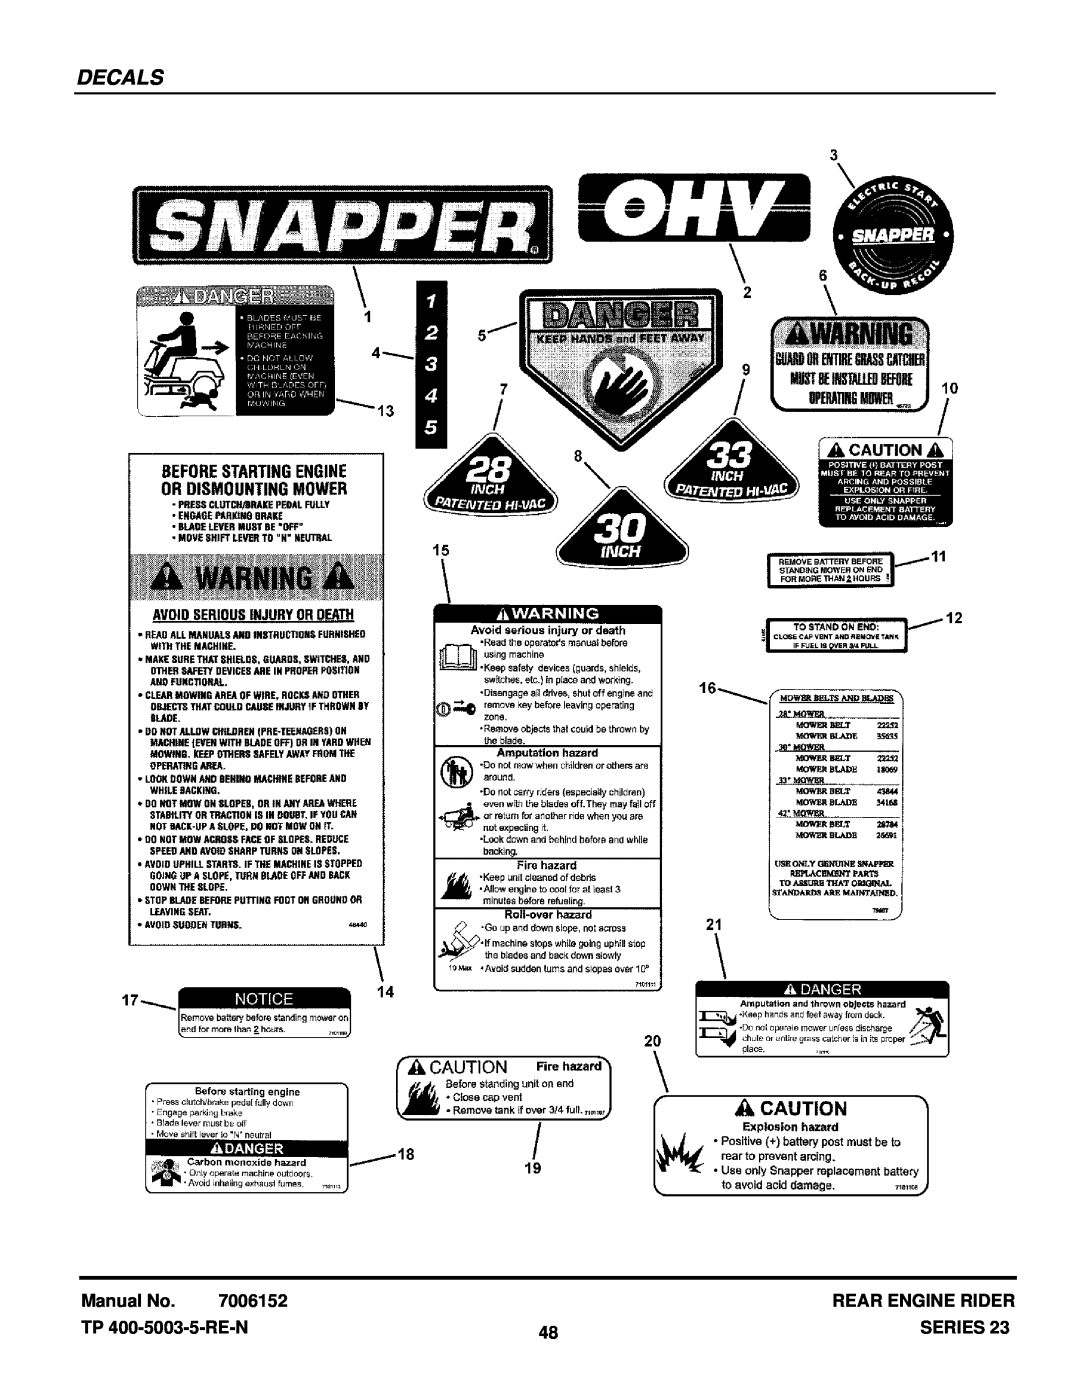 Snapper 281123BV (84940), 2812523BVE (7085622) Decals, Manual No, 7006152, Rear Engine Rider, TP 400-5003-5-RE-N, Series 